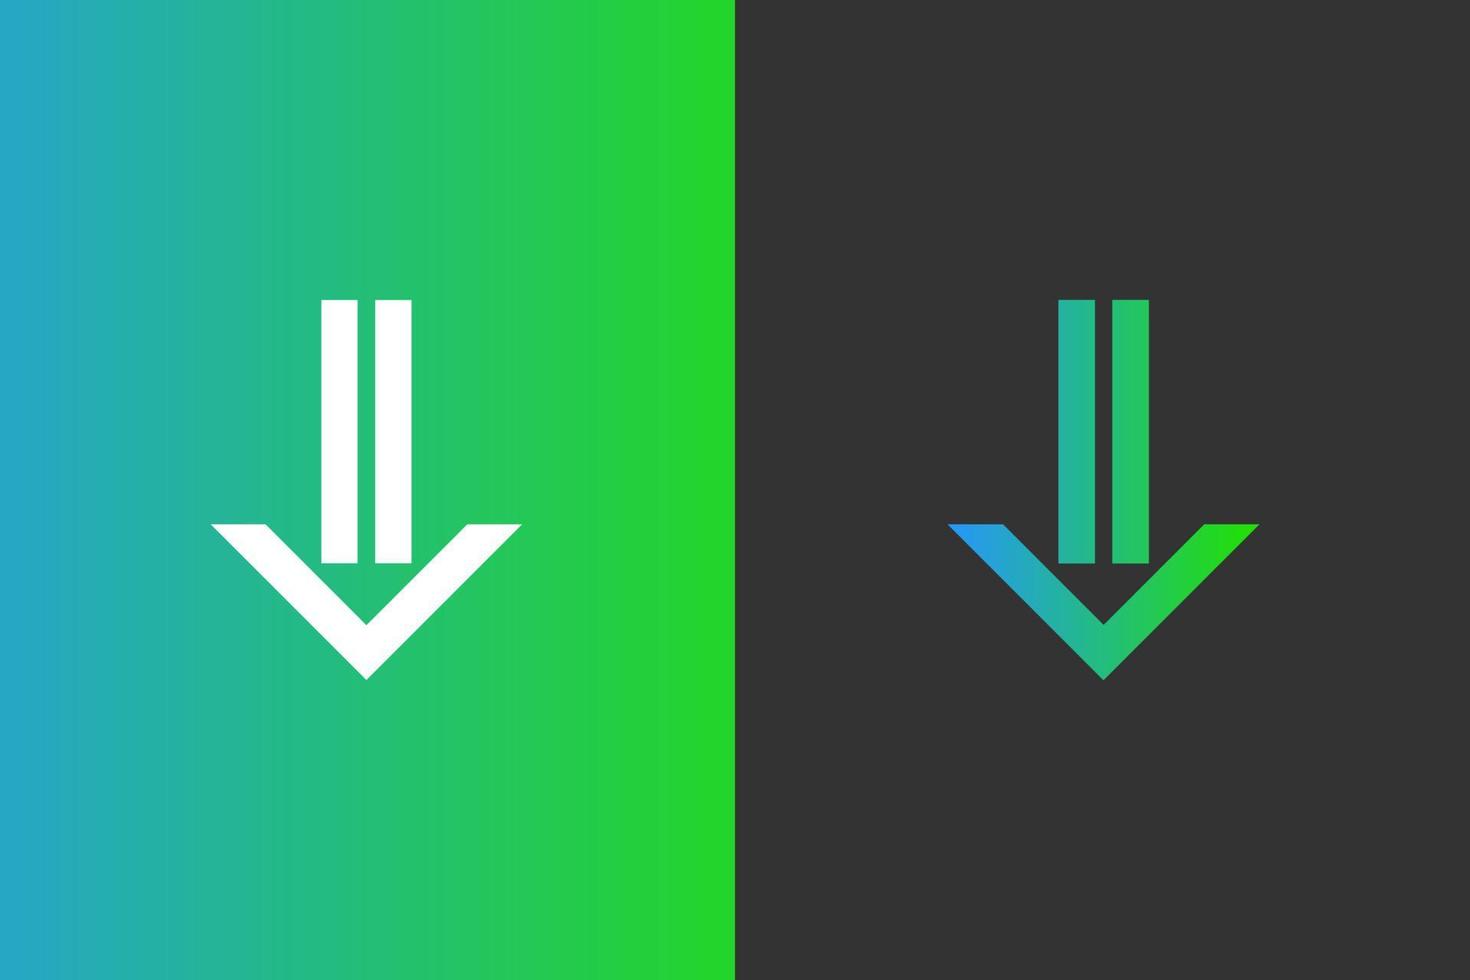 Arrow icon signs symbols blue green vector elegant and modern for your bussiness